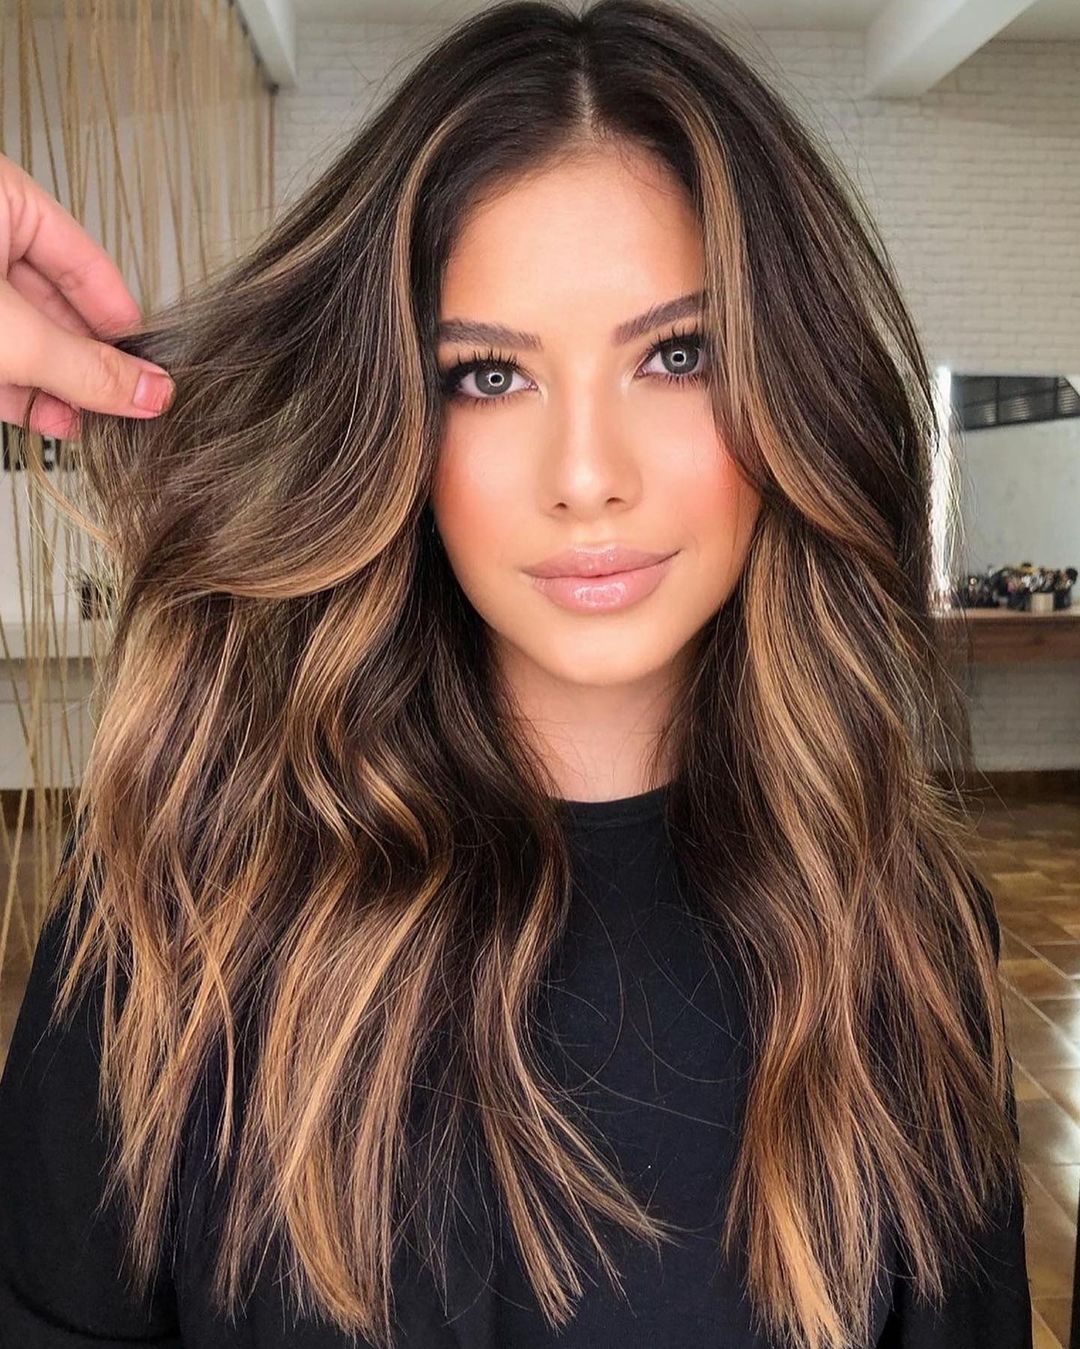 50 Awesome Long Layered Hair Ideas For 2021 images 33